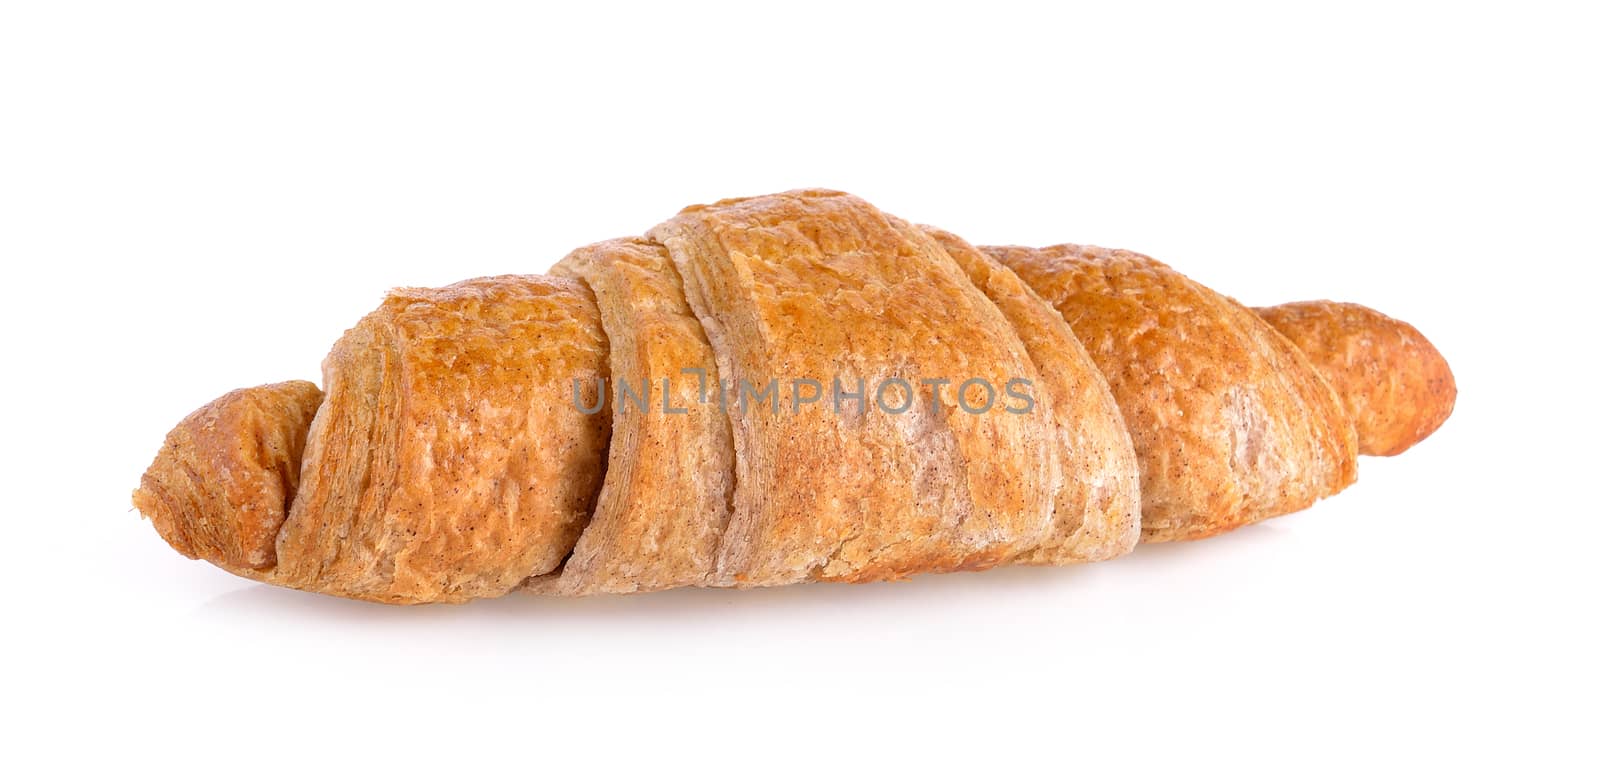 Croissant on white background by sommai